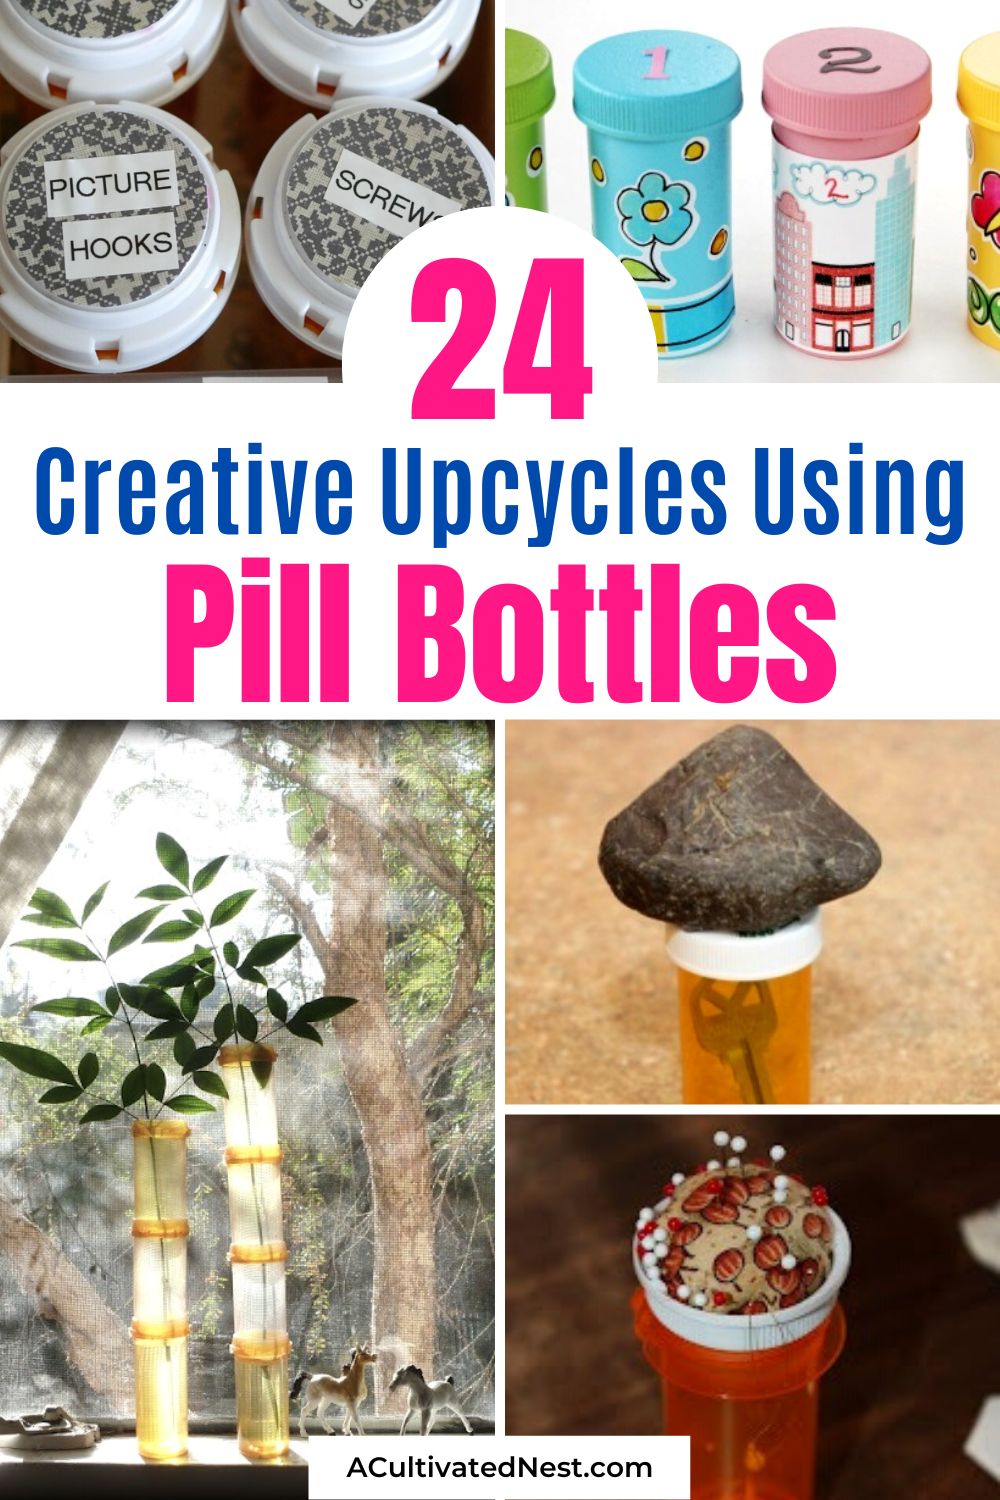 24 Ways to Upcycle Pill Bottles- When you've taken all the medicine in a pill bottle, don't throw it out. Instead, put it to good use with one of these many clever ways to upcycle pill bottles! | DIY organizers, upcycled organization, #upcyclingProjects #upcycle #diyProjects #organizing #ACultivatedNest